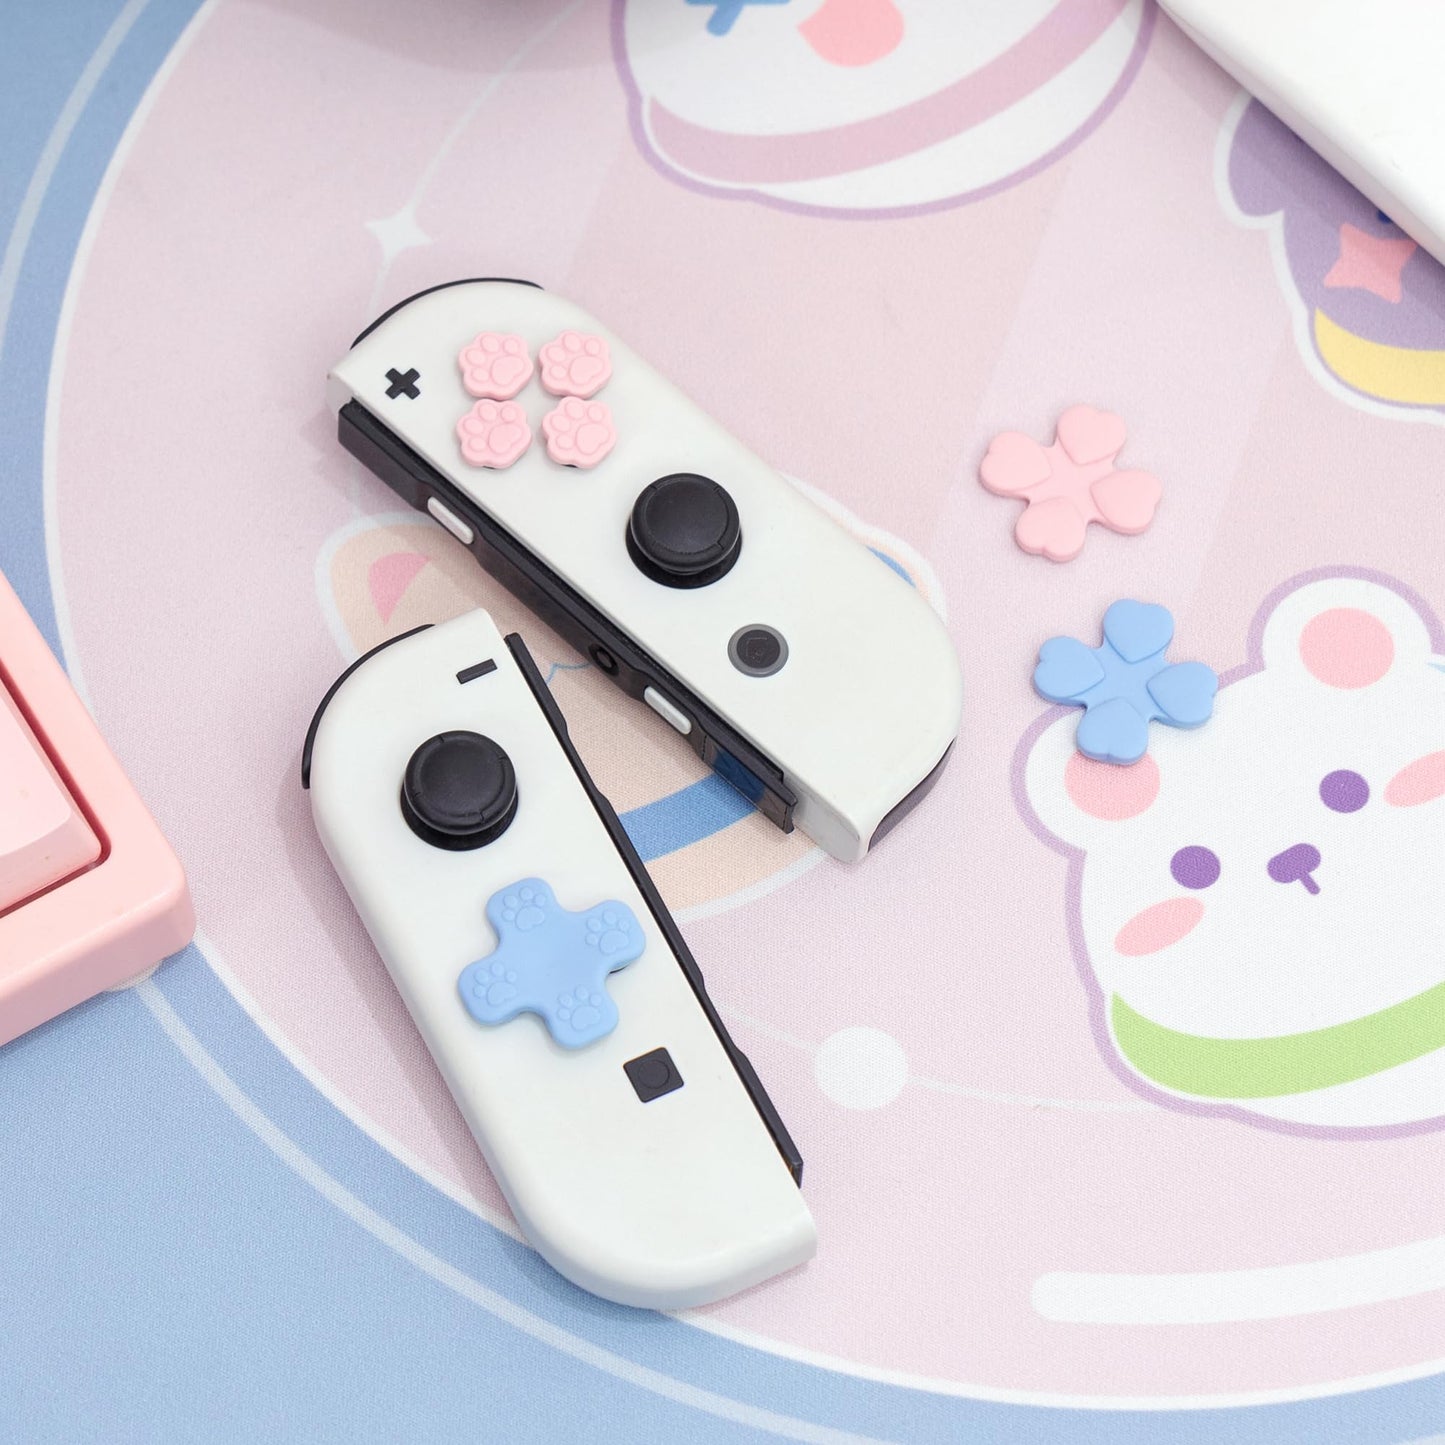 GeekShare Cat Paw Button Caps GeekShare Cat Paw Button Caps Compatible with Nintendo Switch